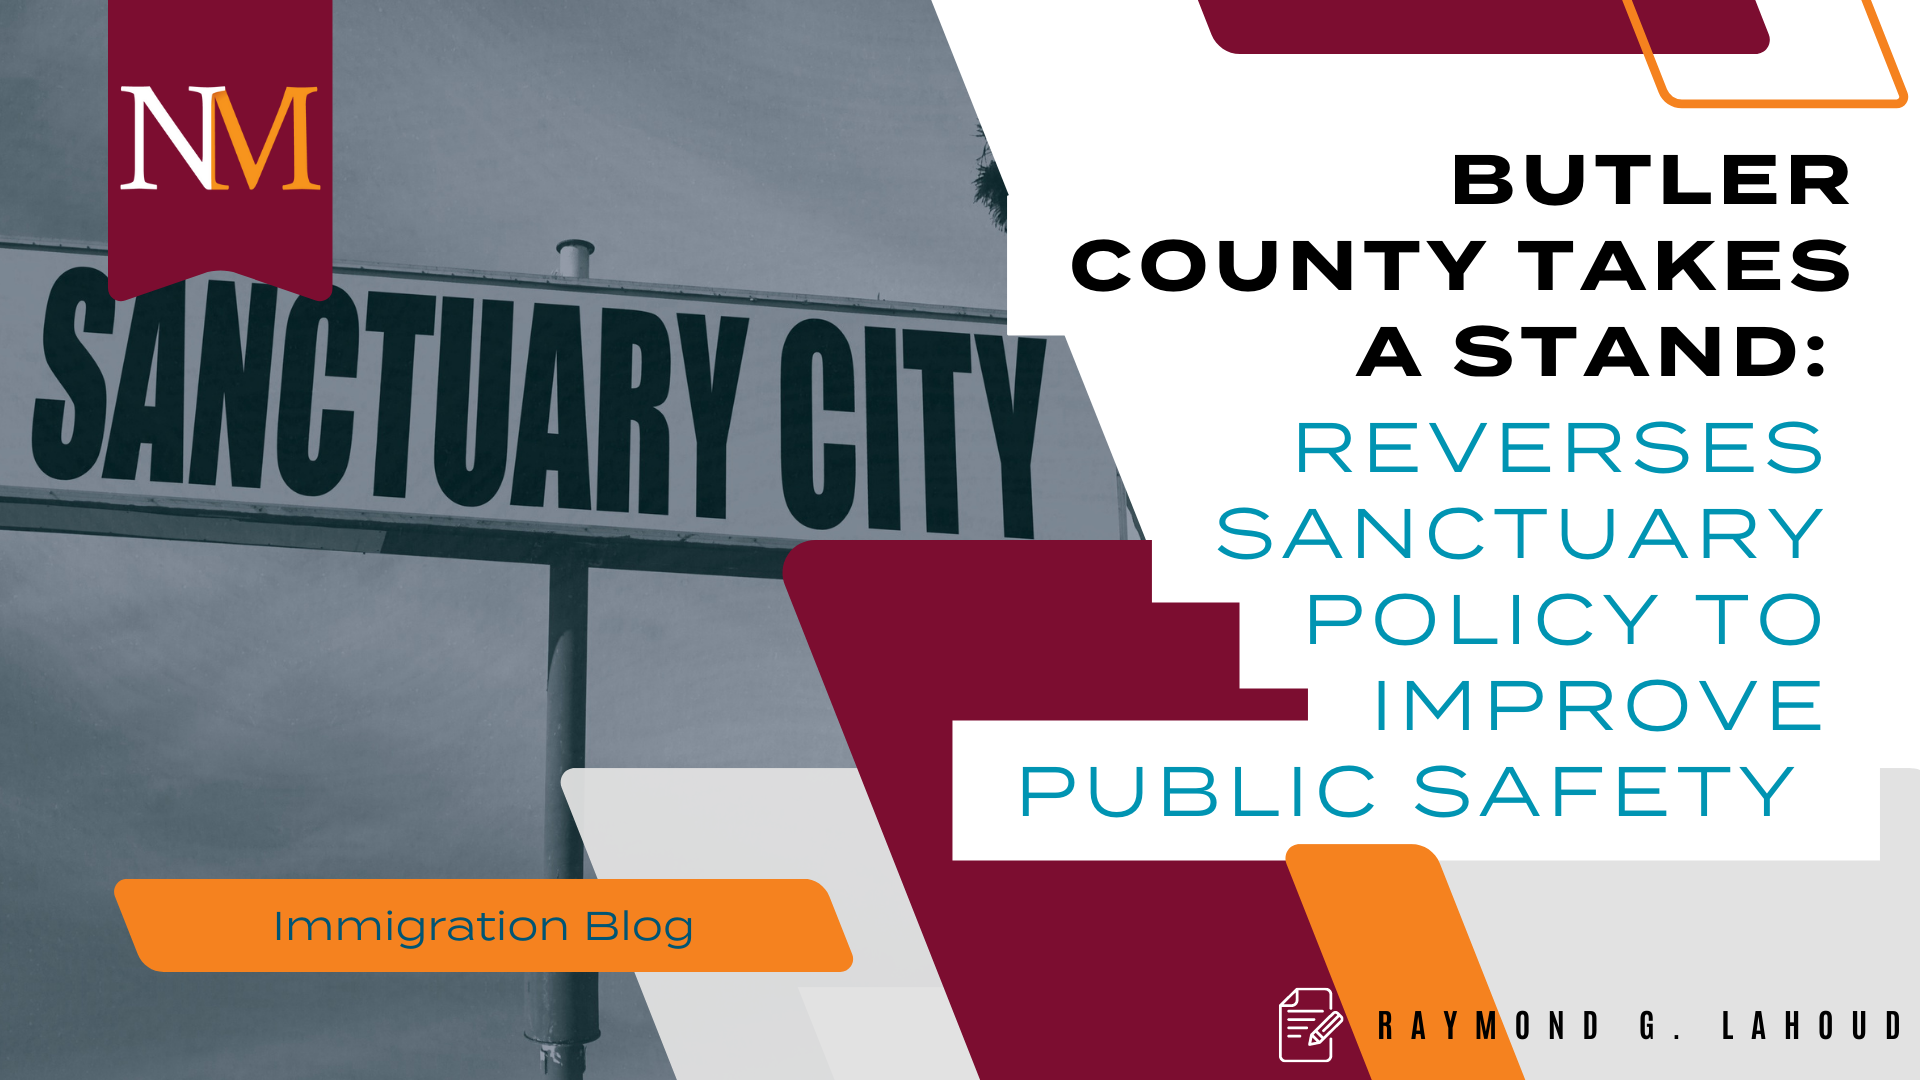 Butler County Takes a Stand: Reverses Sanctuary Policy to Improve Public Safety